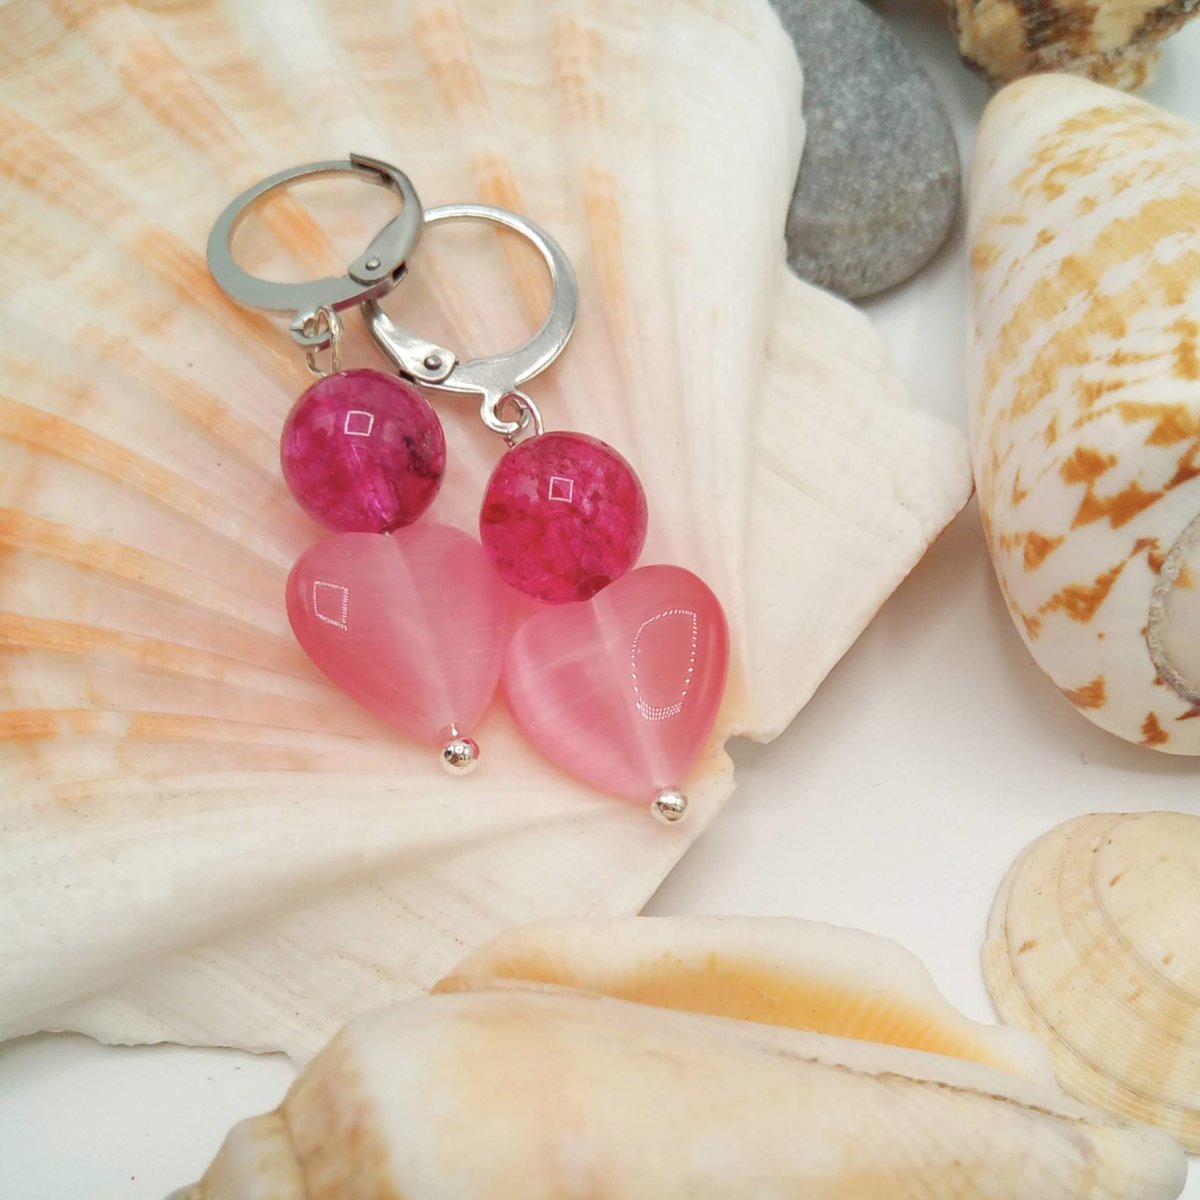 These pretty Pink Heart & Fuchsia Crackle Bead Earrings can be posted to you today. Price is £9 + P&P. folksy.com/items/7762492-… #newonfolksy #folksy365 #folksy #folksyshop #beadedearrings #pinkearrings #heartearrings #pinkheartearrings #birthdaygift #anniversarygift #giftforher